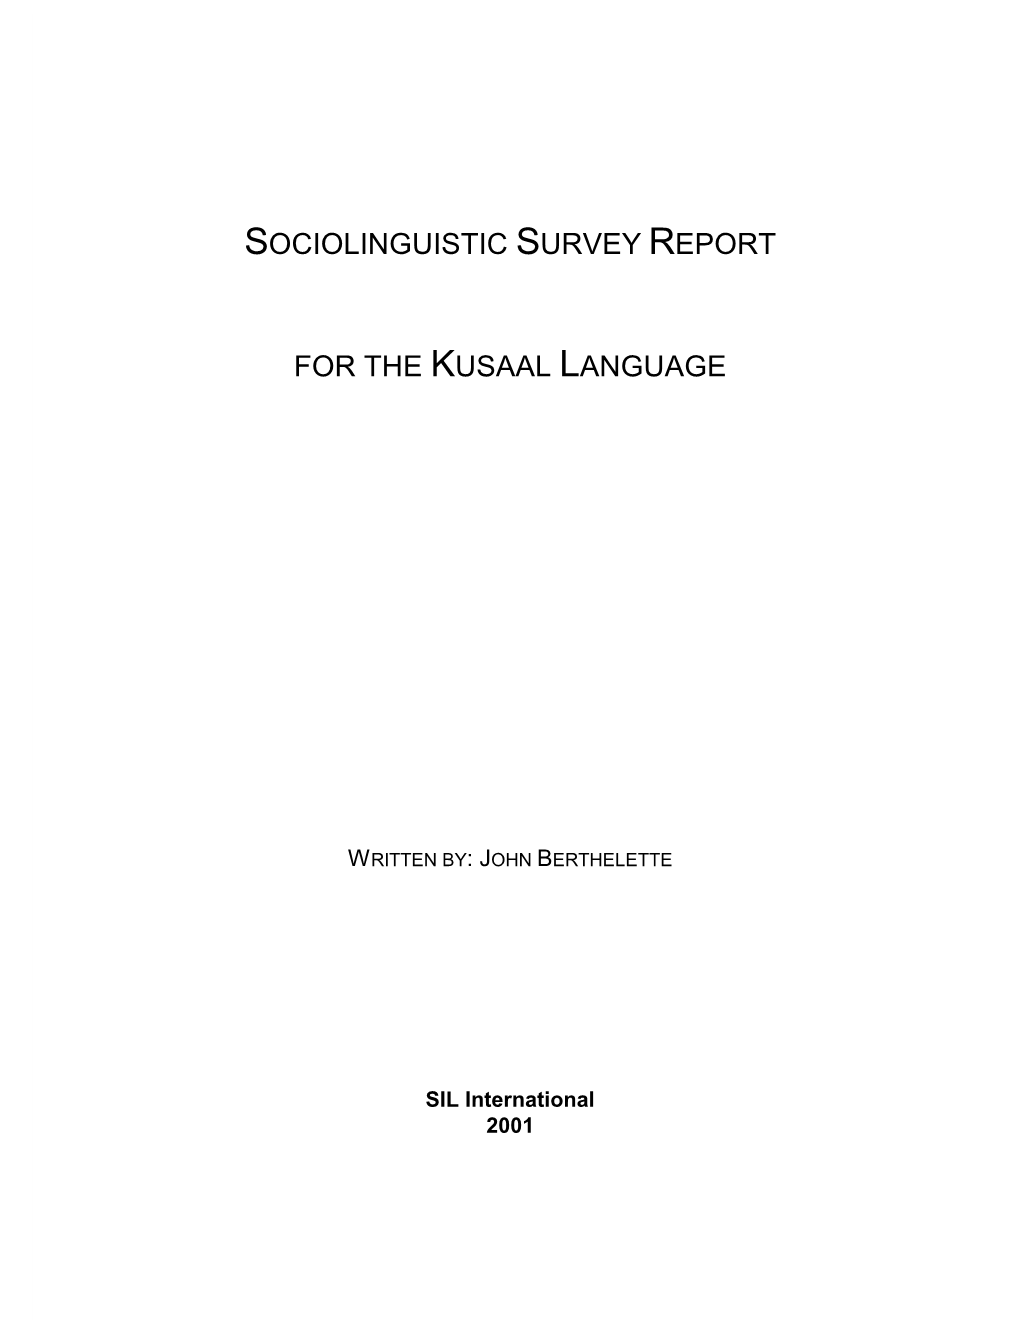 For the Kusaal Language